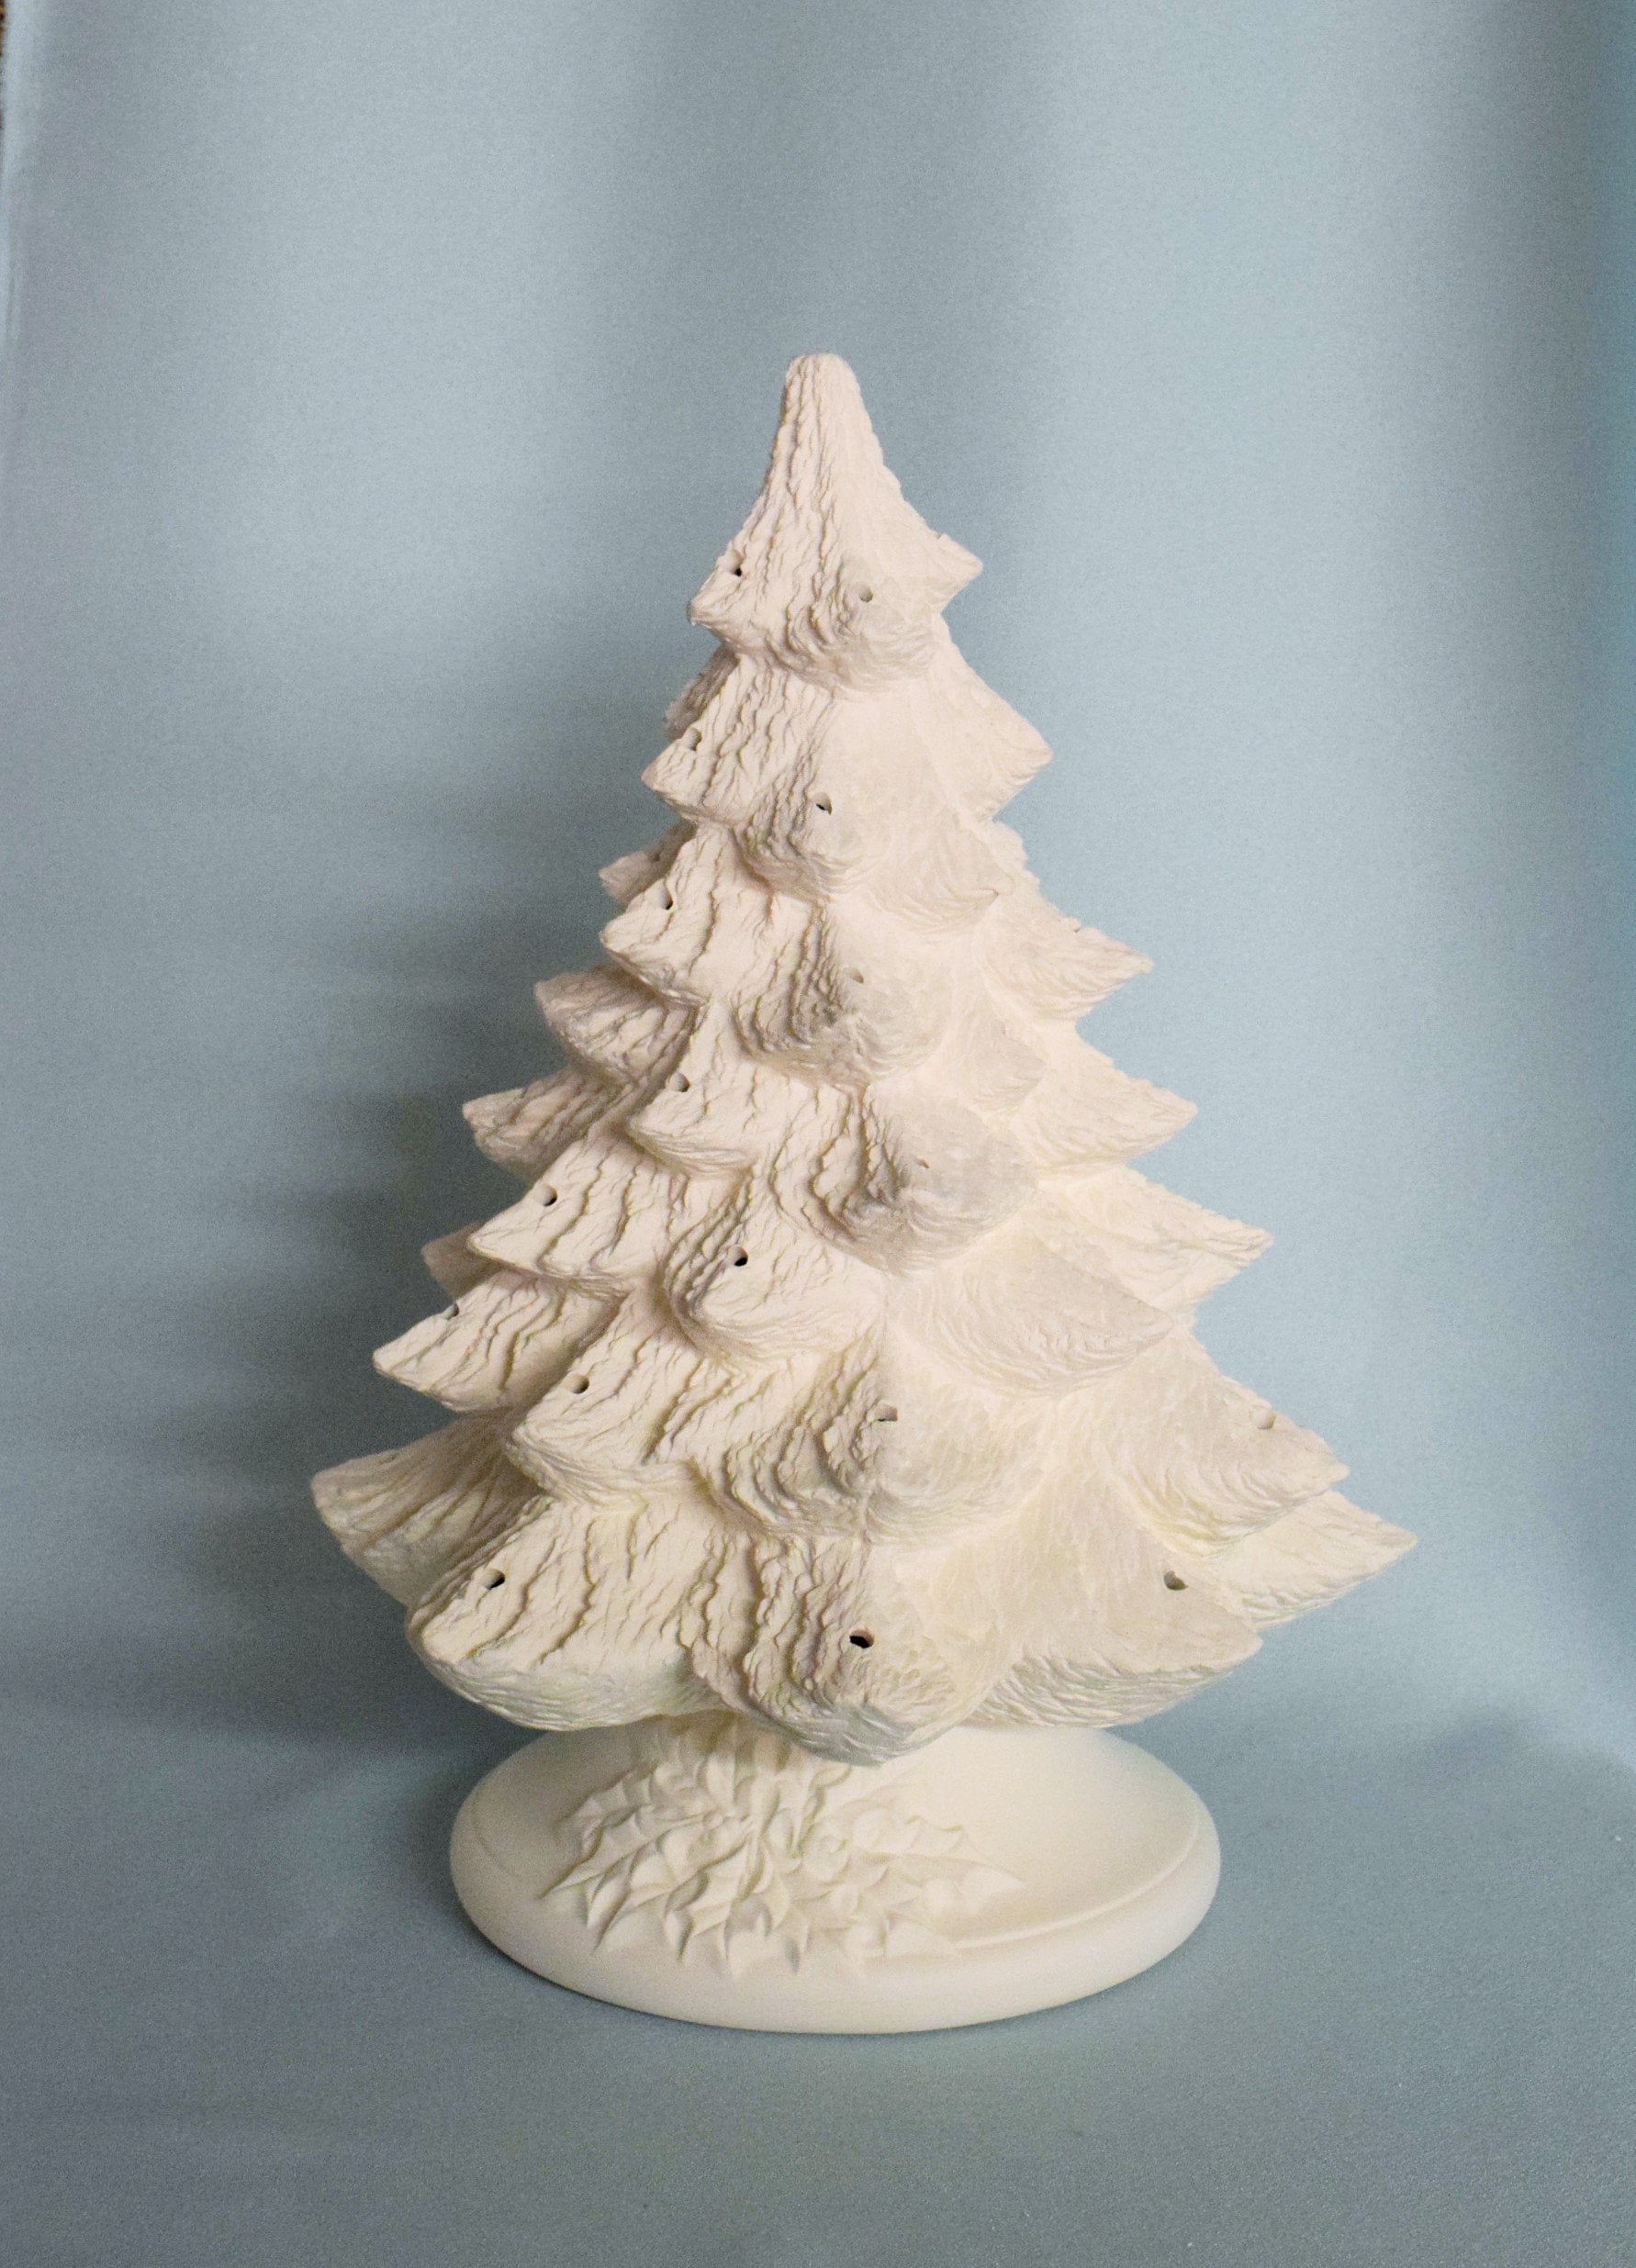 Vintage Ceramic Christmas Trees - Paint your own pottery